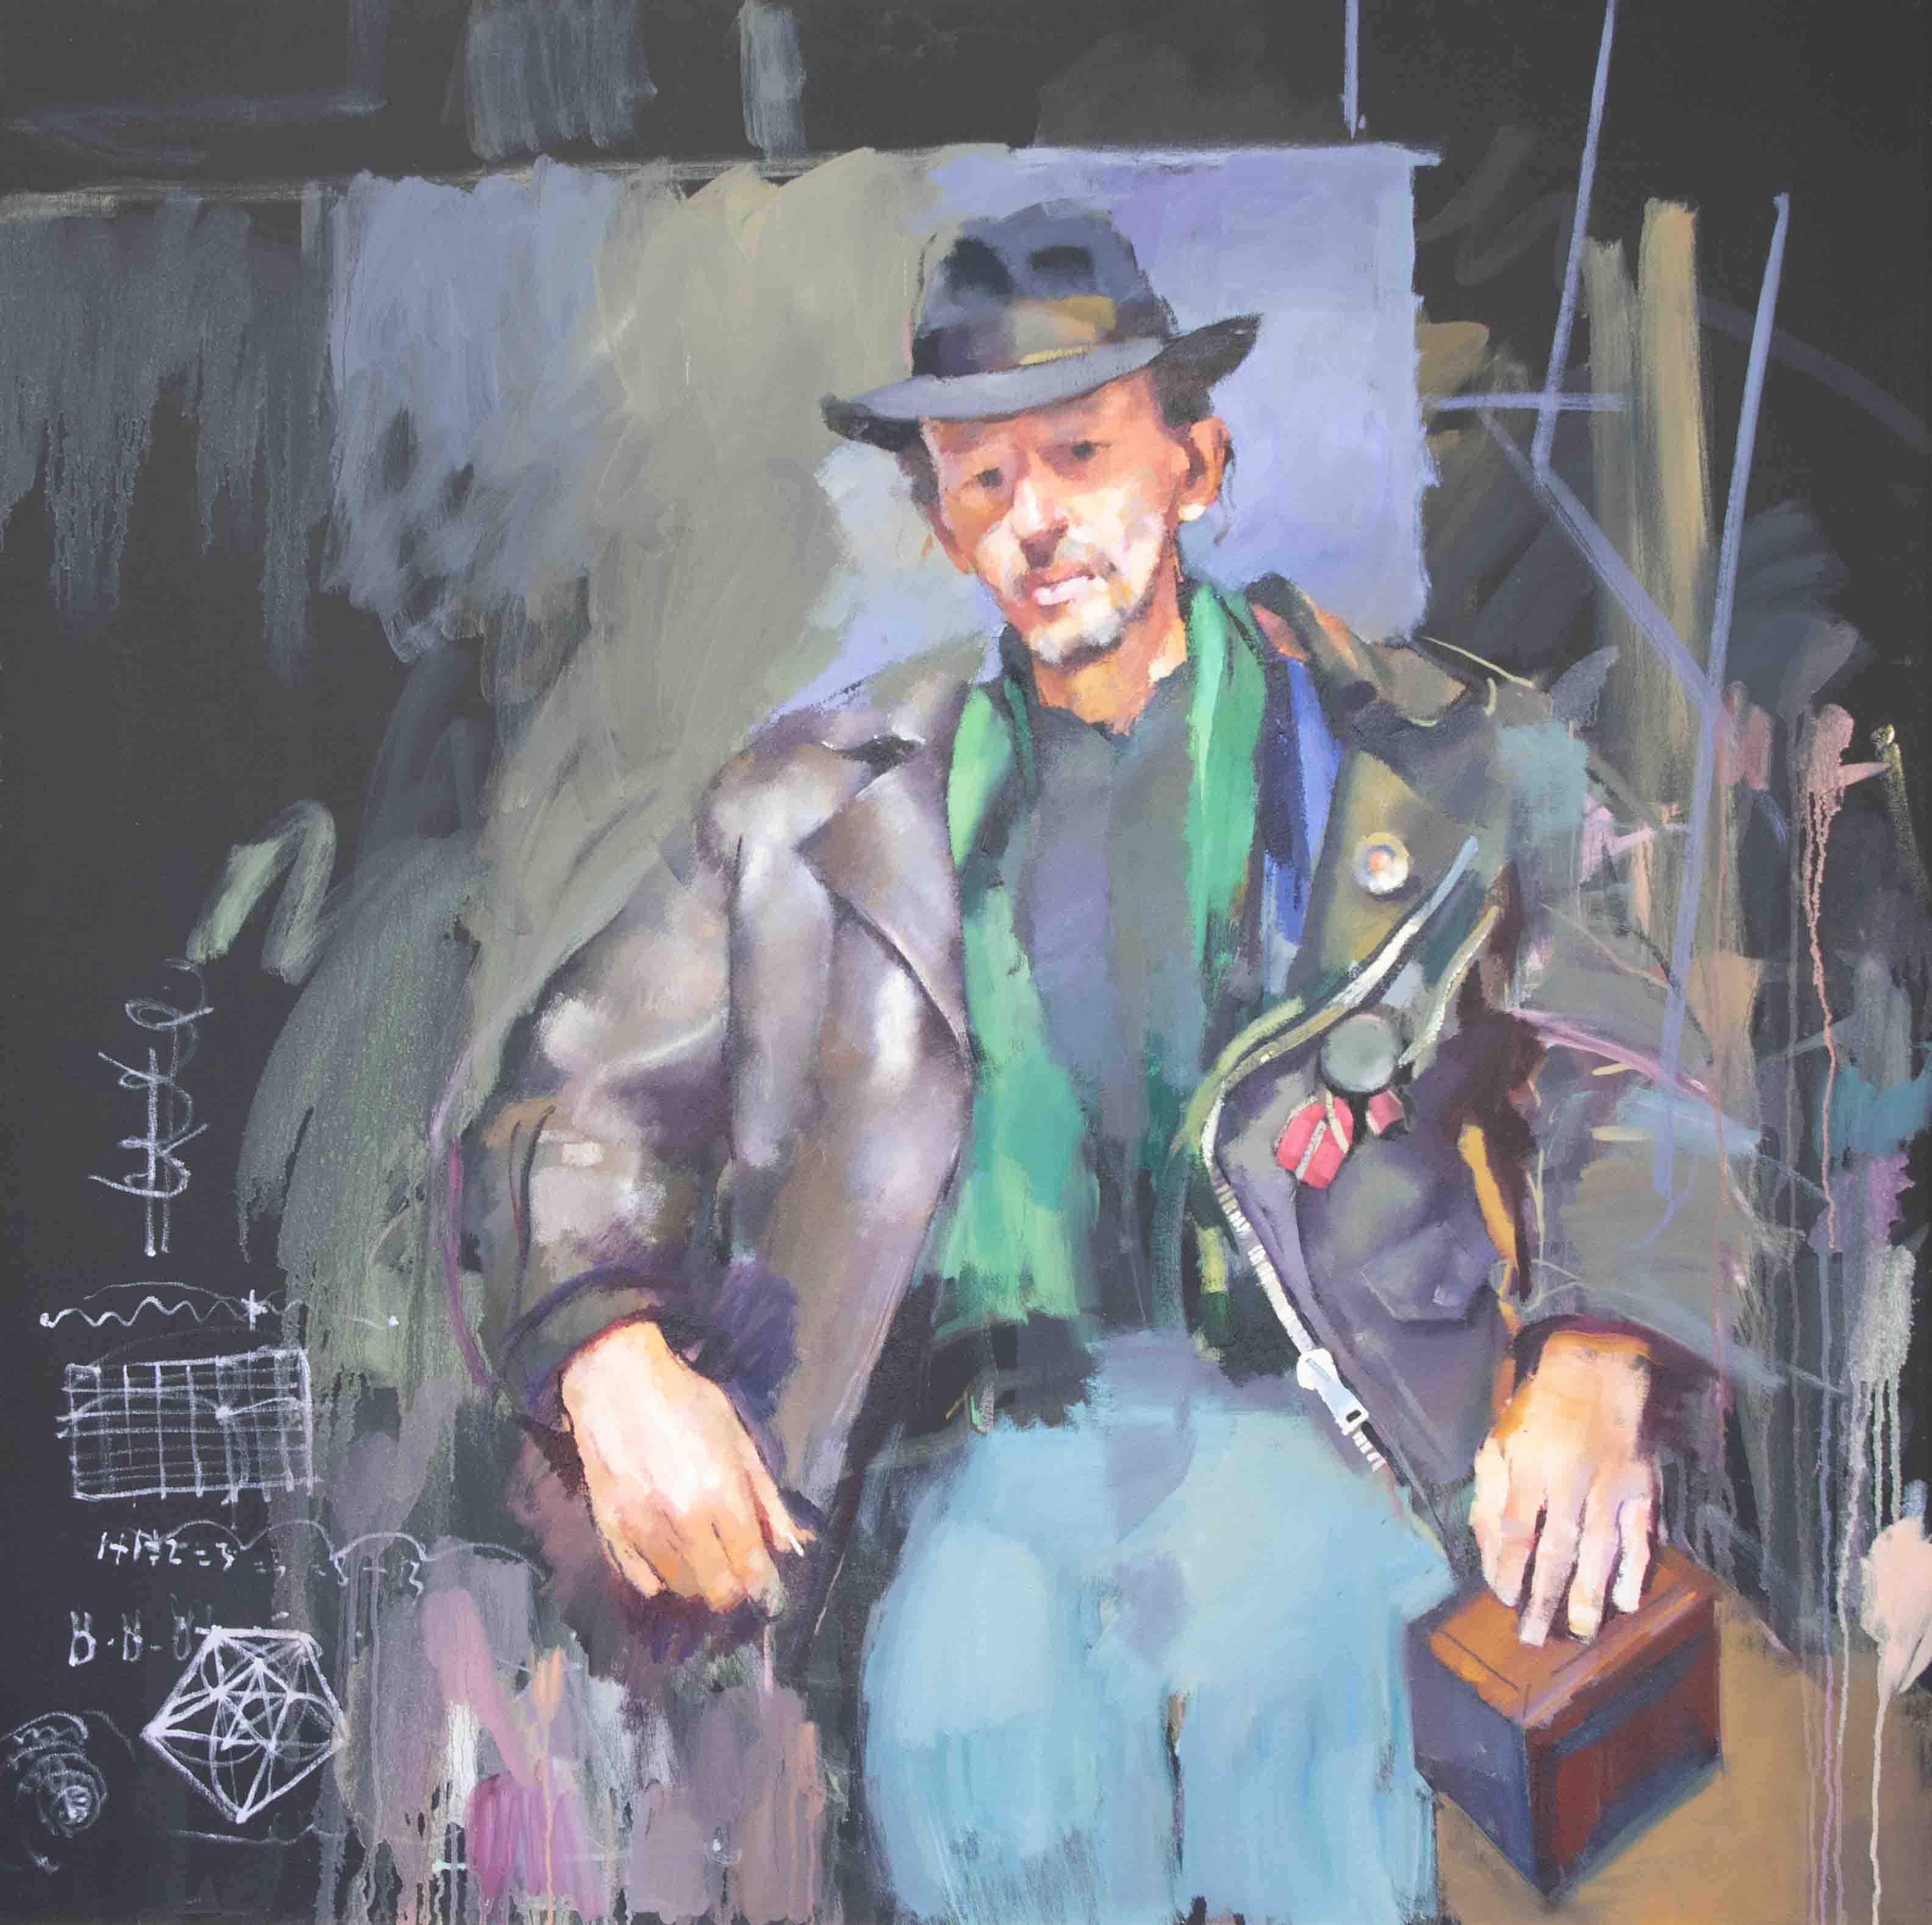 Robert Lenkiewicz (1941-2002) Project 20 Addictive Behaviour, oil on canvas 'A Man In Leather Jacket - Image 2 of 2